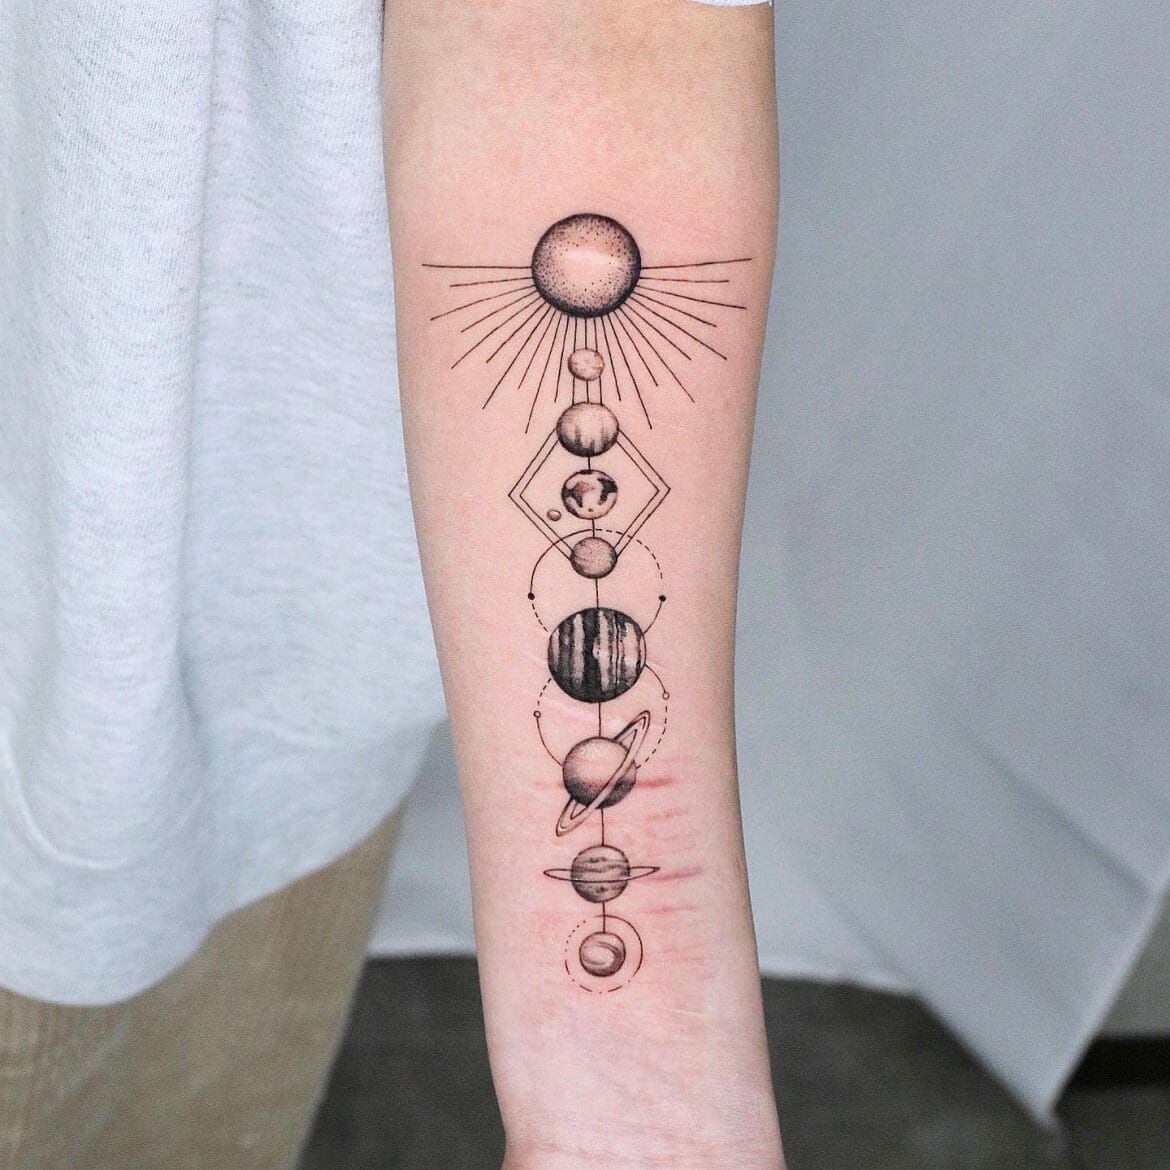 10 Latest Sun Tattoo Ideas To Inspire In 2023! - Outsons